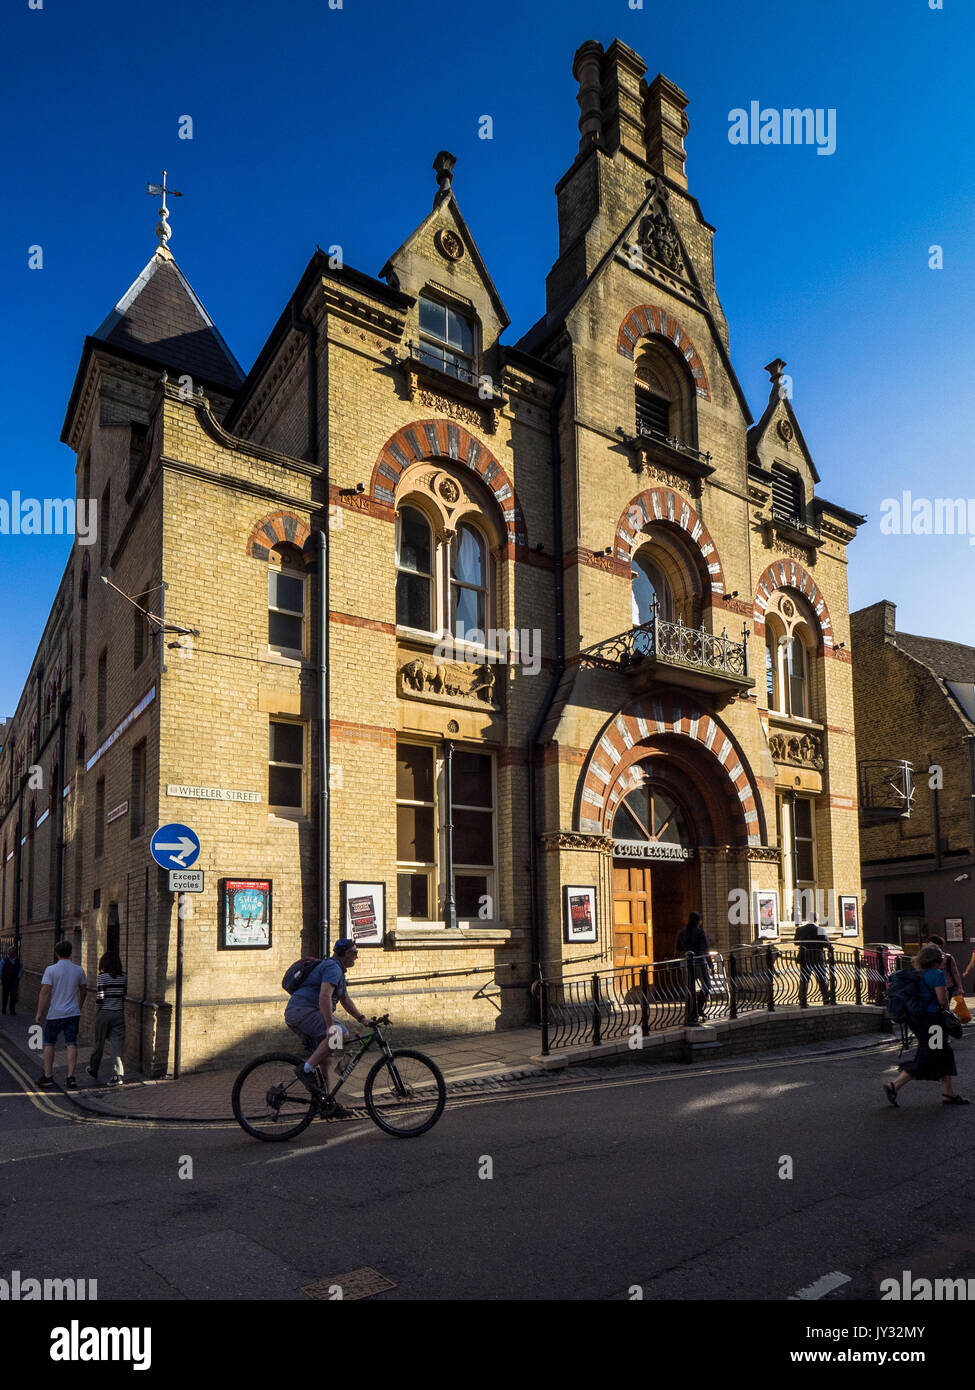 Cambridge Corn Exchange - concert and events venue in Central Cambridge UK, opened in 1875 Stock Photo